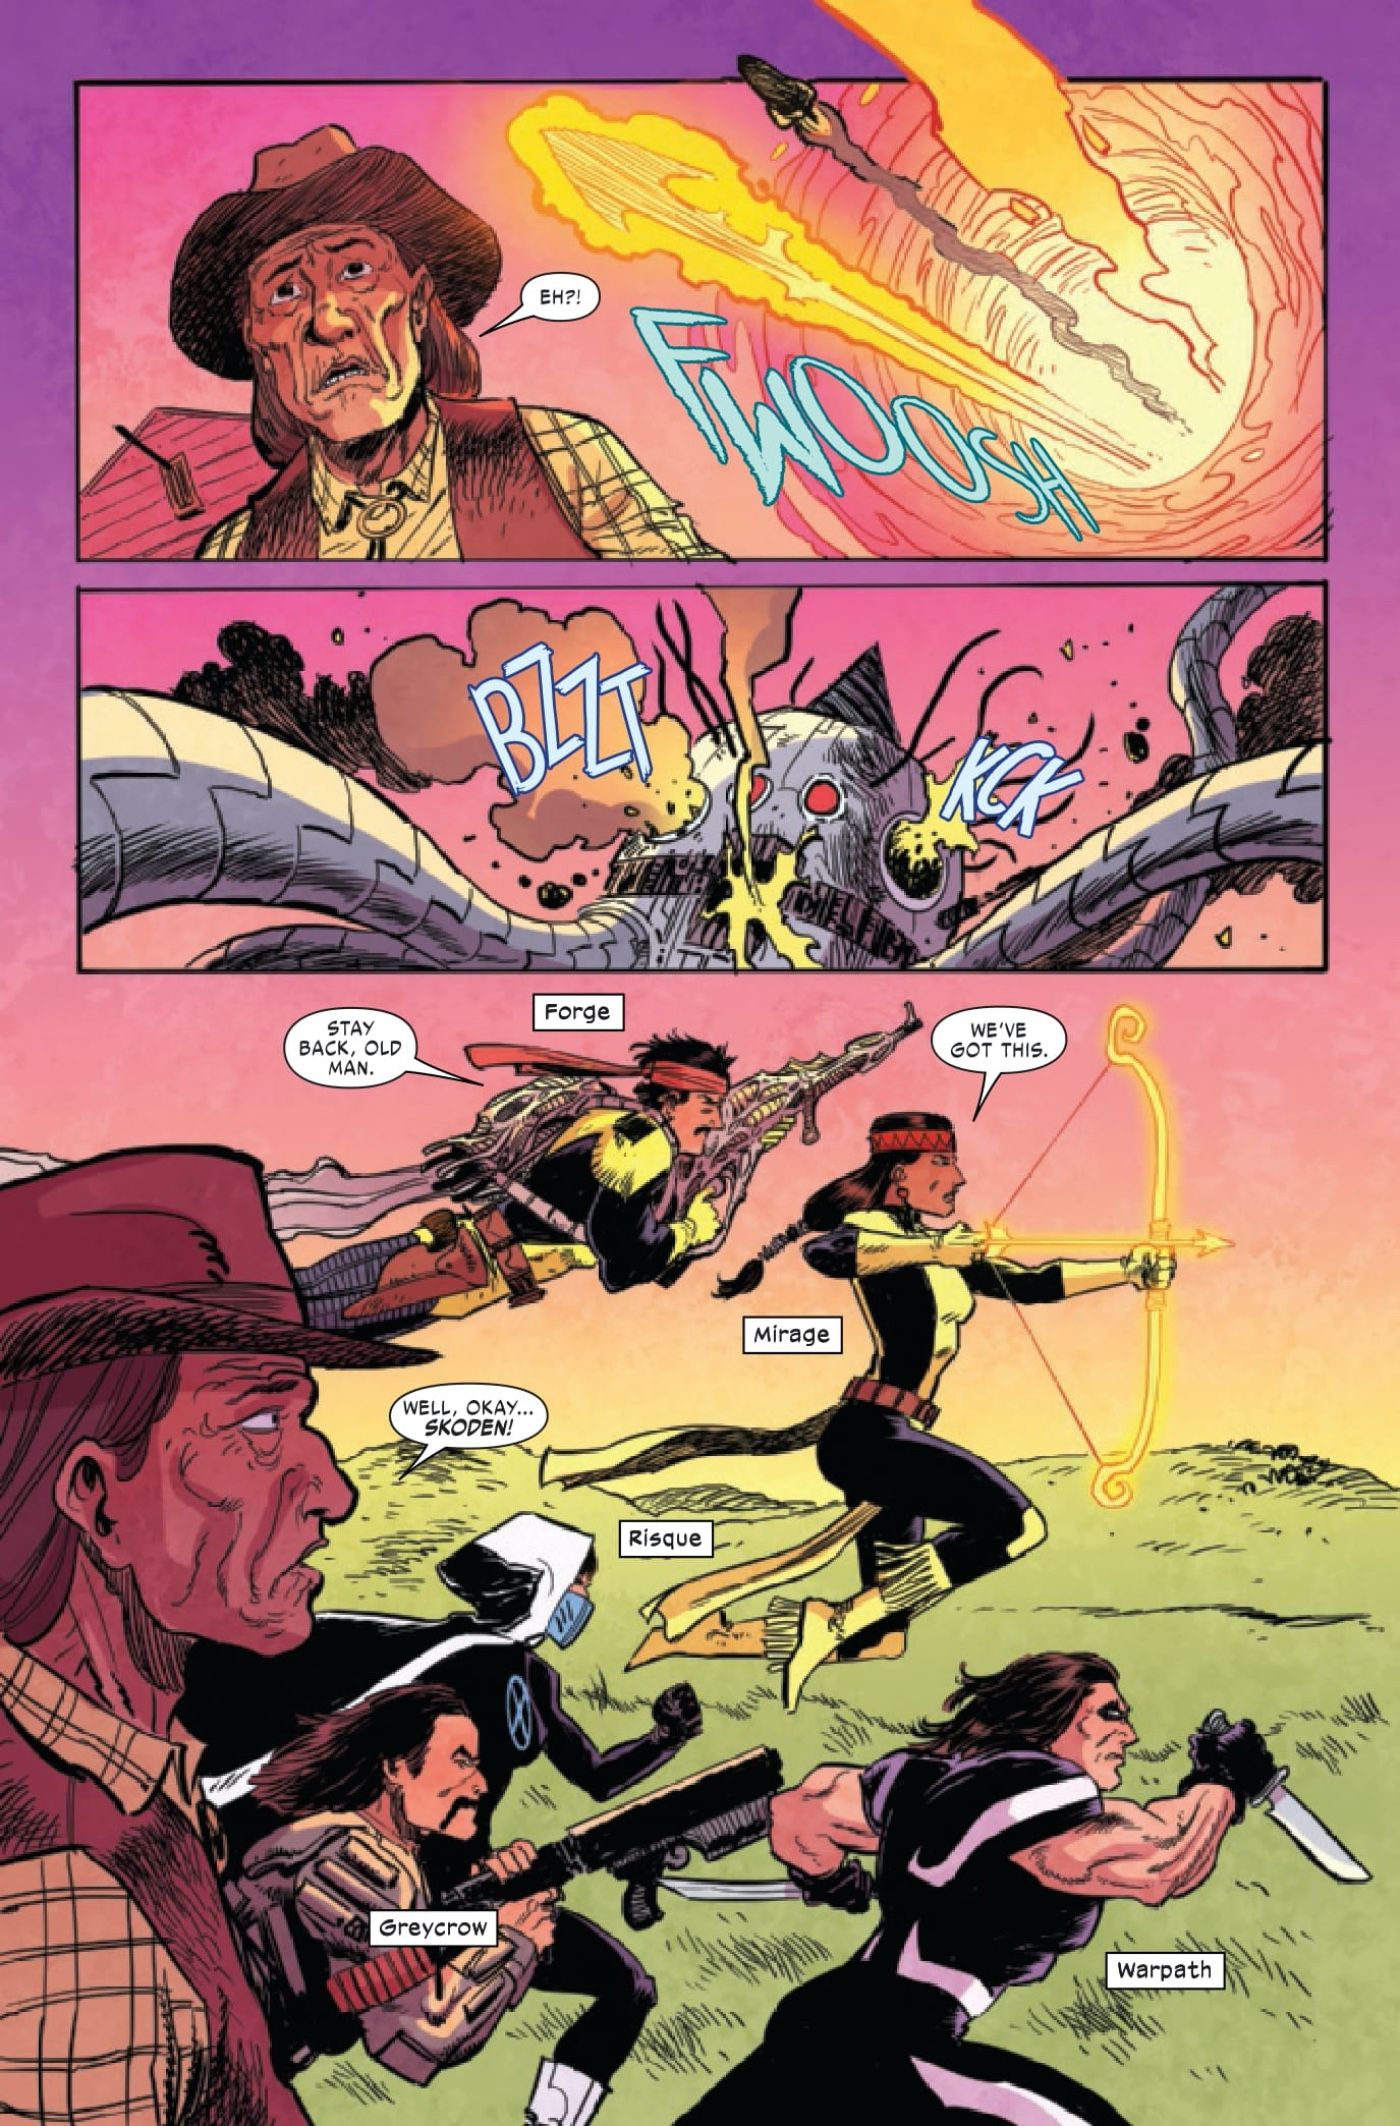 Marvel's Indigenous X-Men go into battle, while an elderly Indigenous man looks on